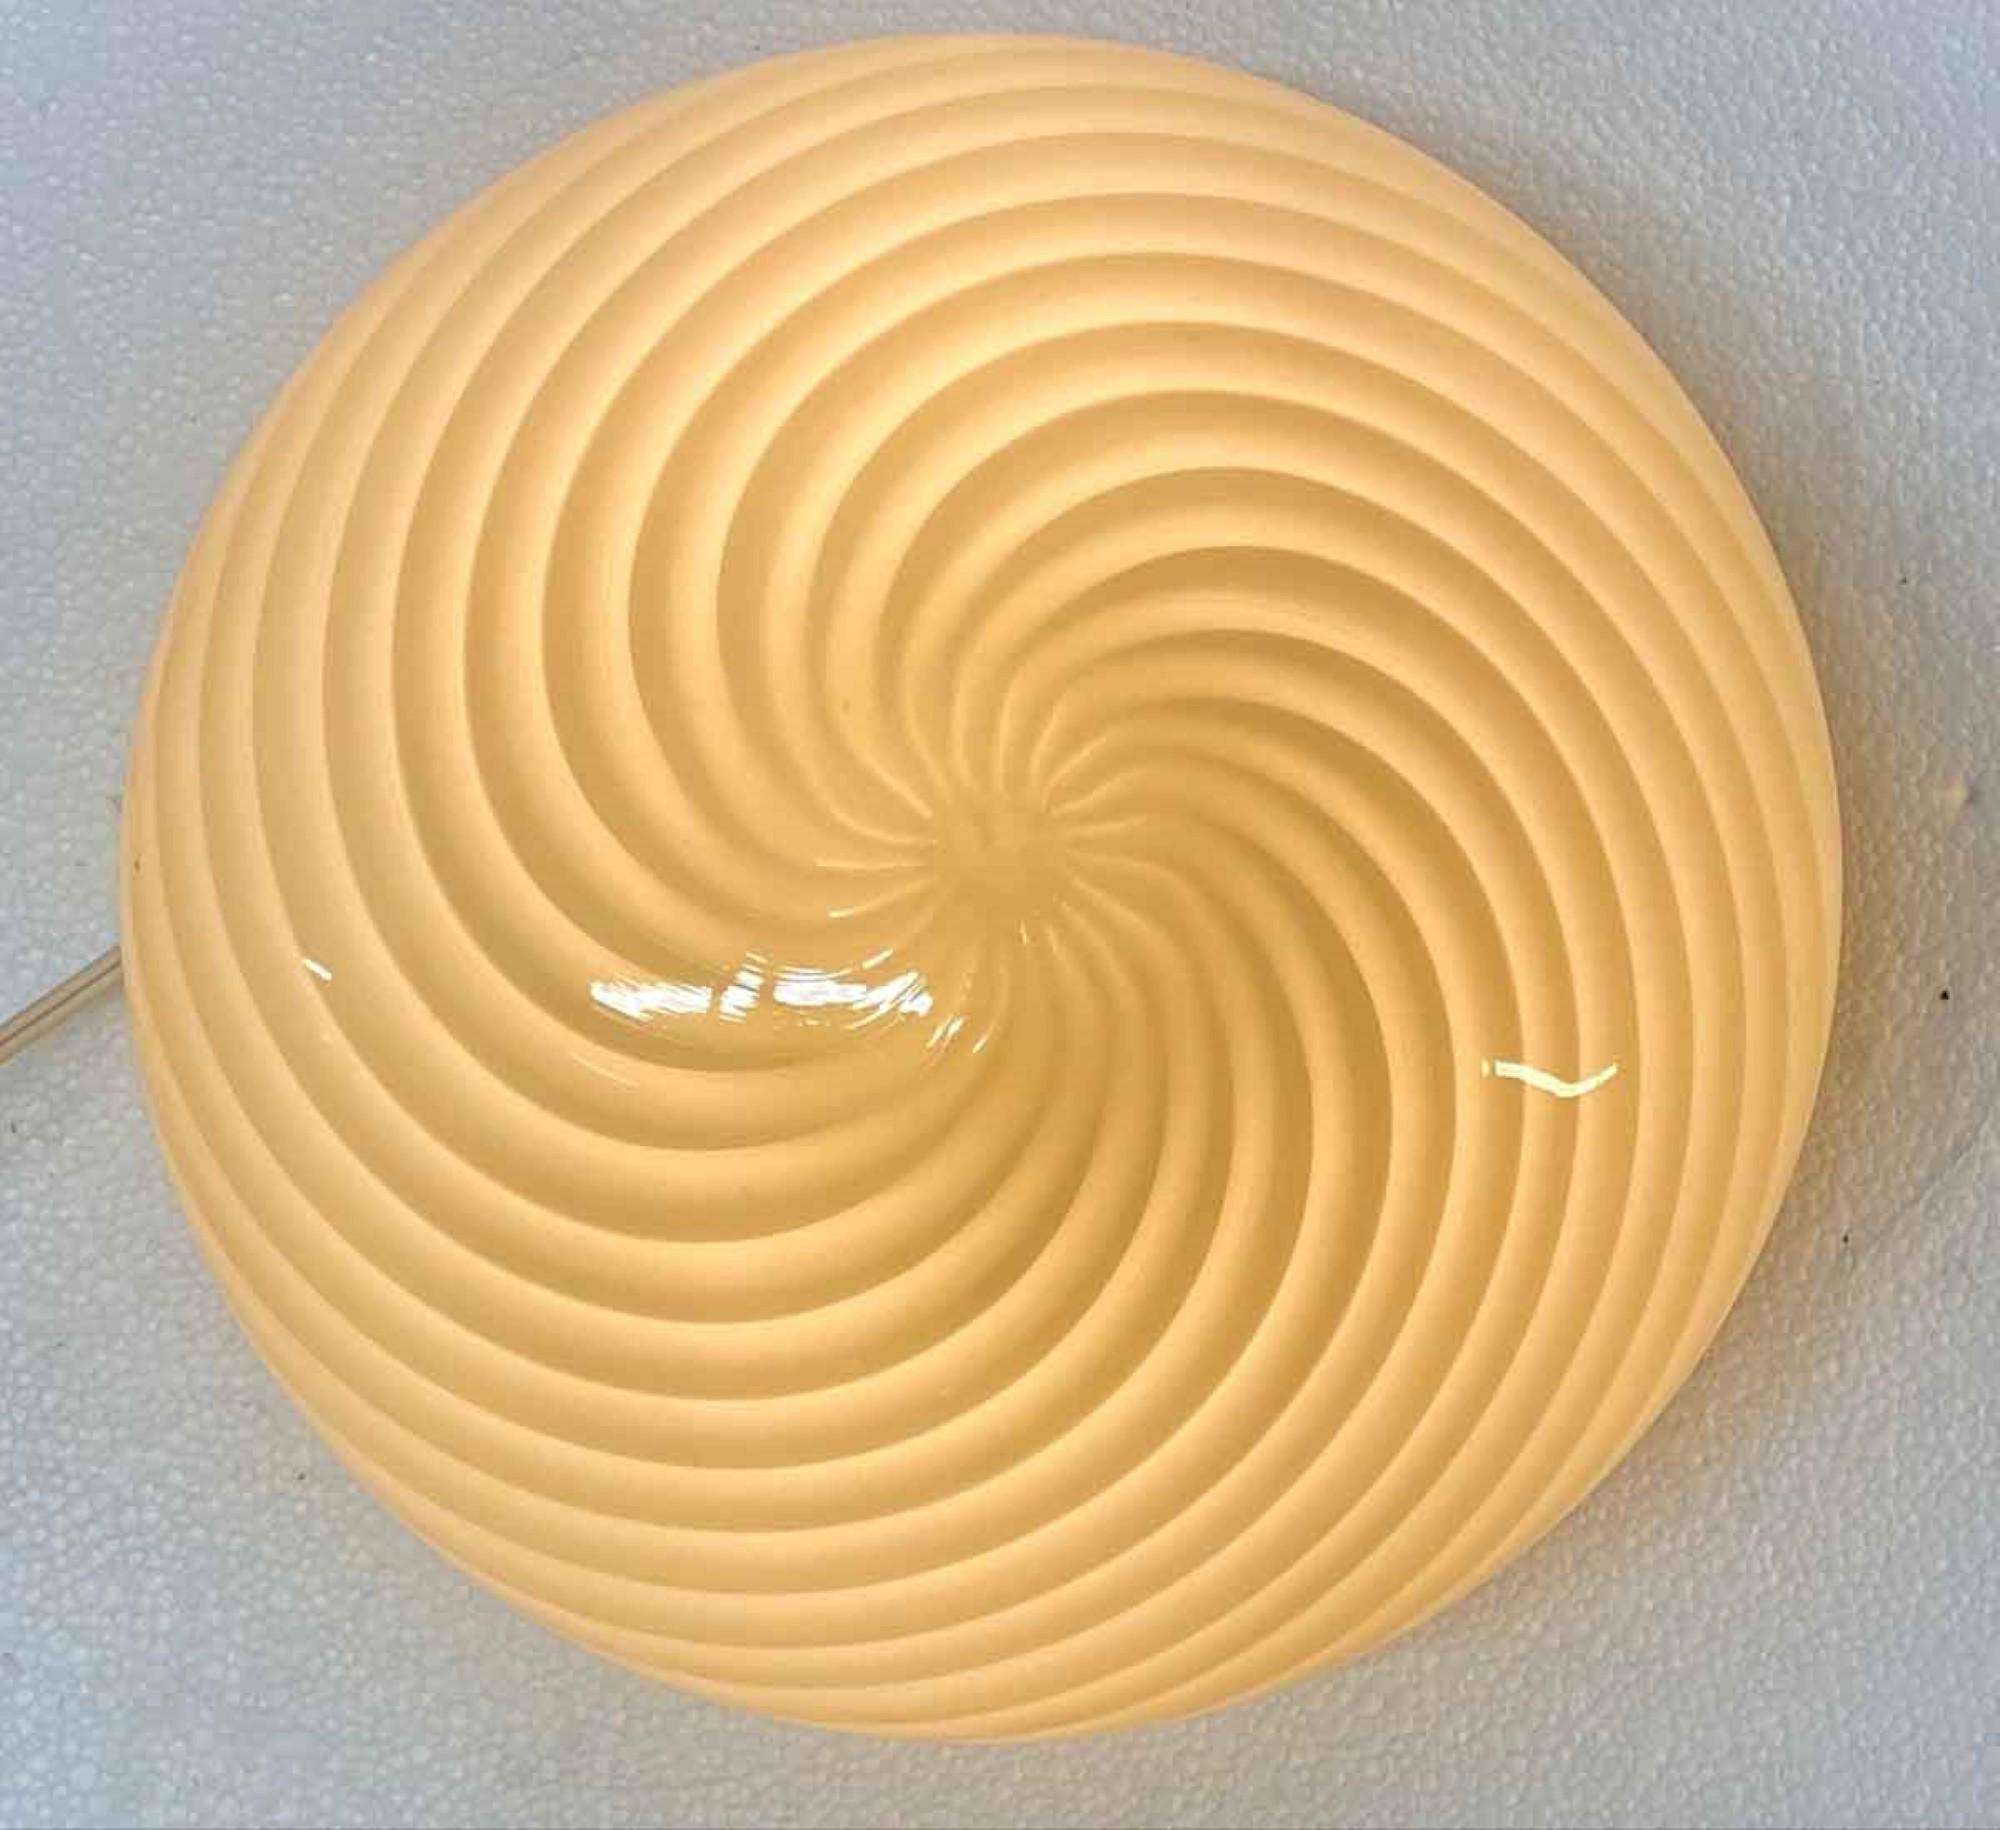 1980s hand blown Mid-Century Modern round glass fixture by Vetri Murano. This light requires two bulbs, 60 watts max. Measures: 15.5 in. Cleaned and rewired. Small quantity available at time of posting. Priced each. Please inquire. Please note, this